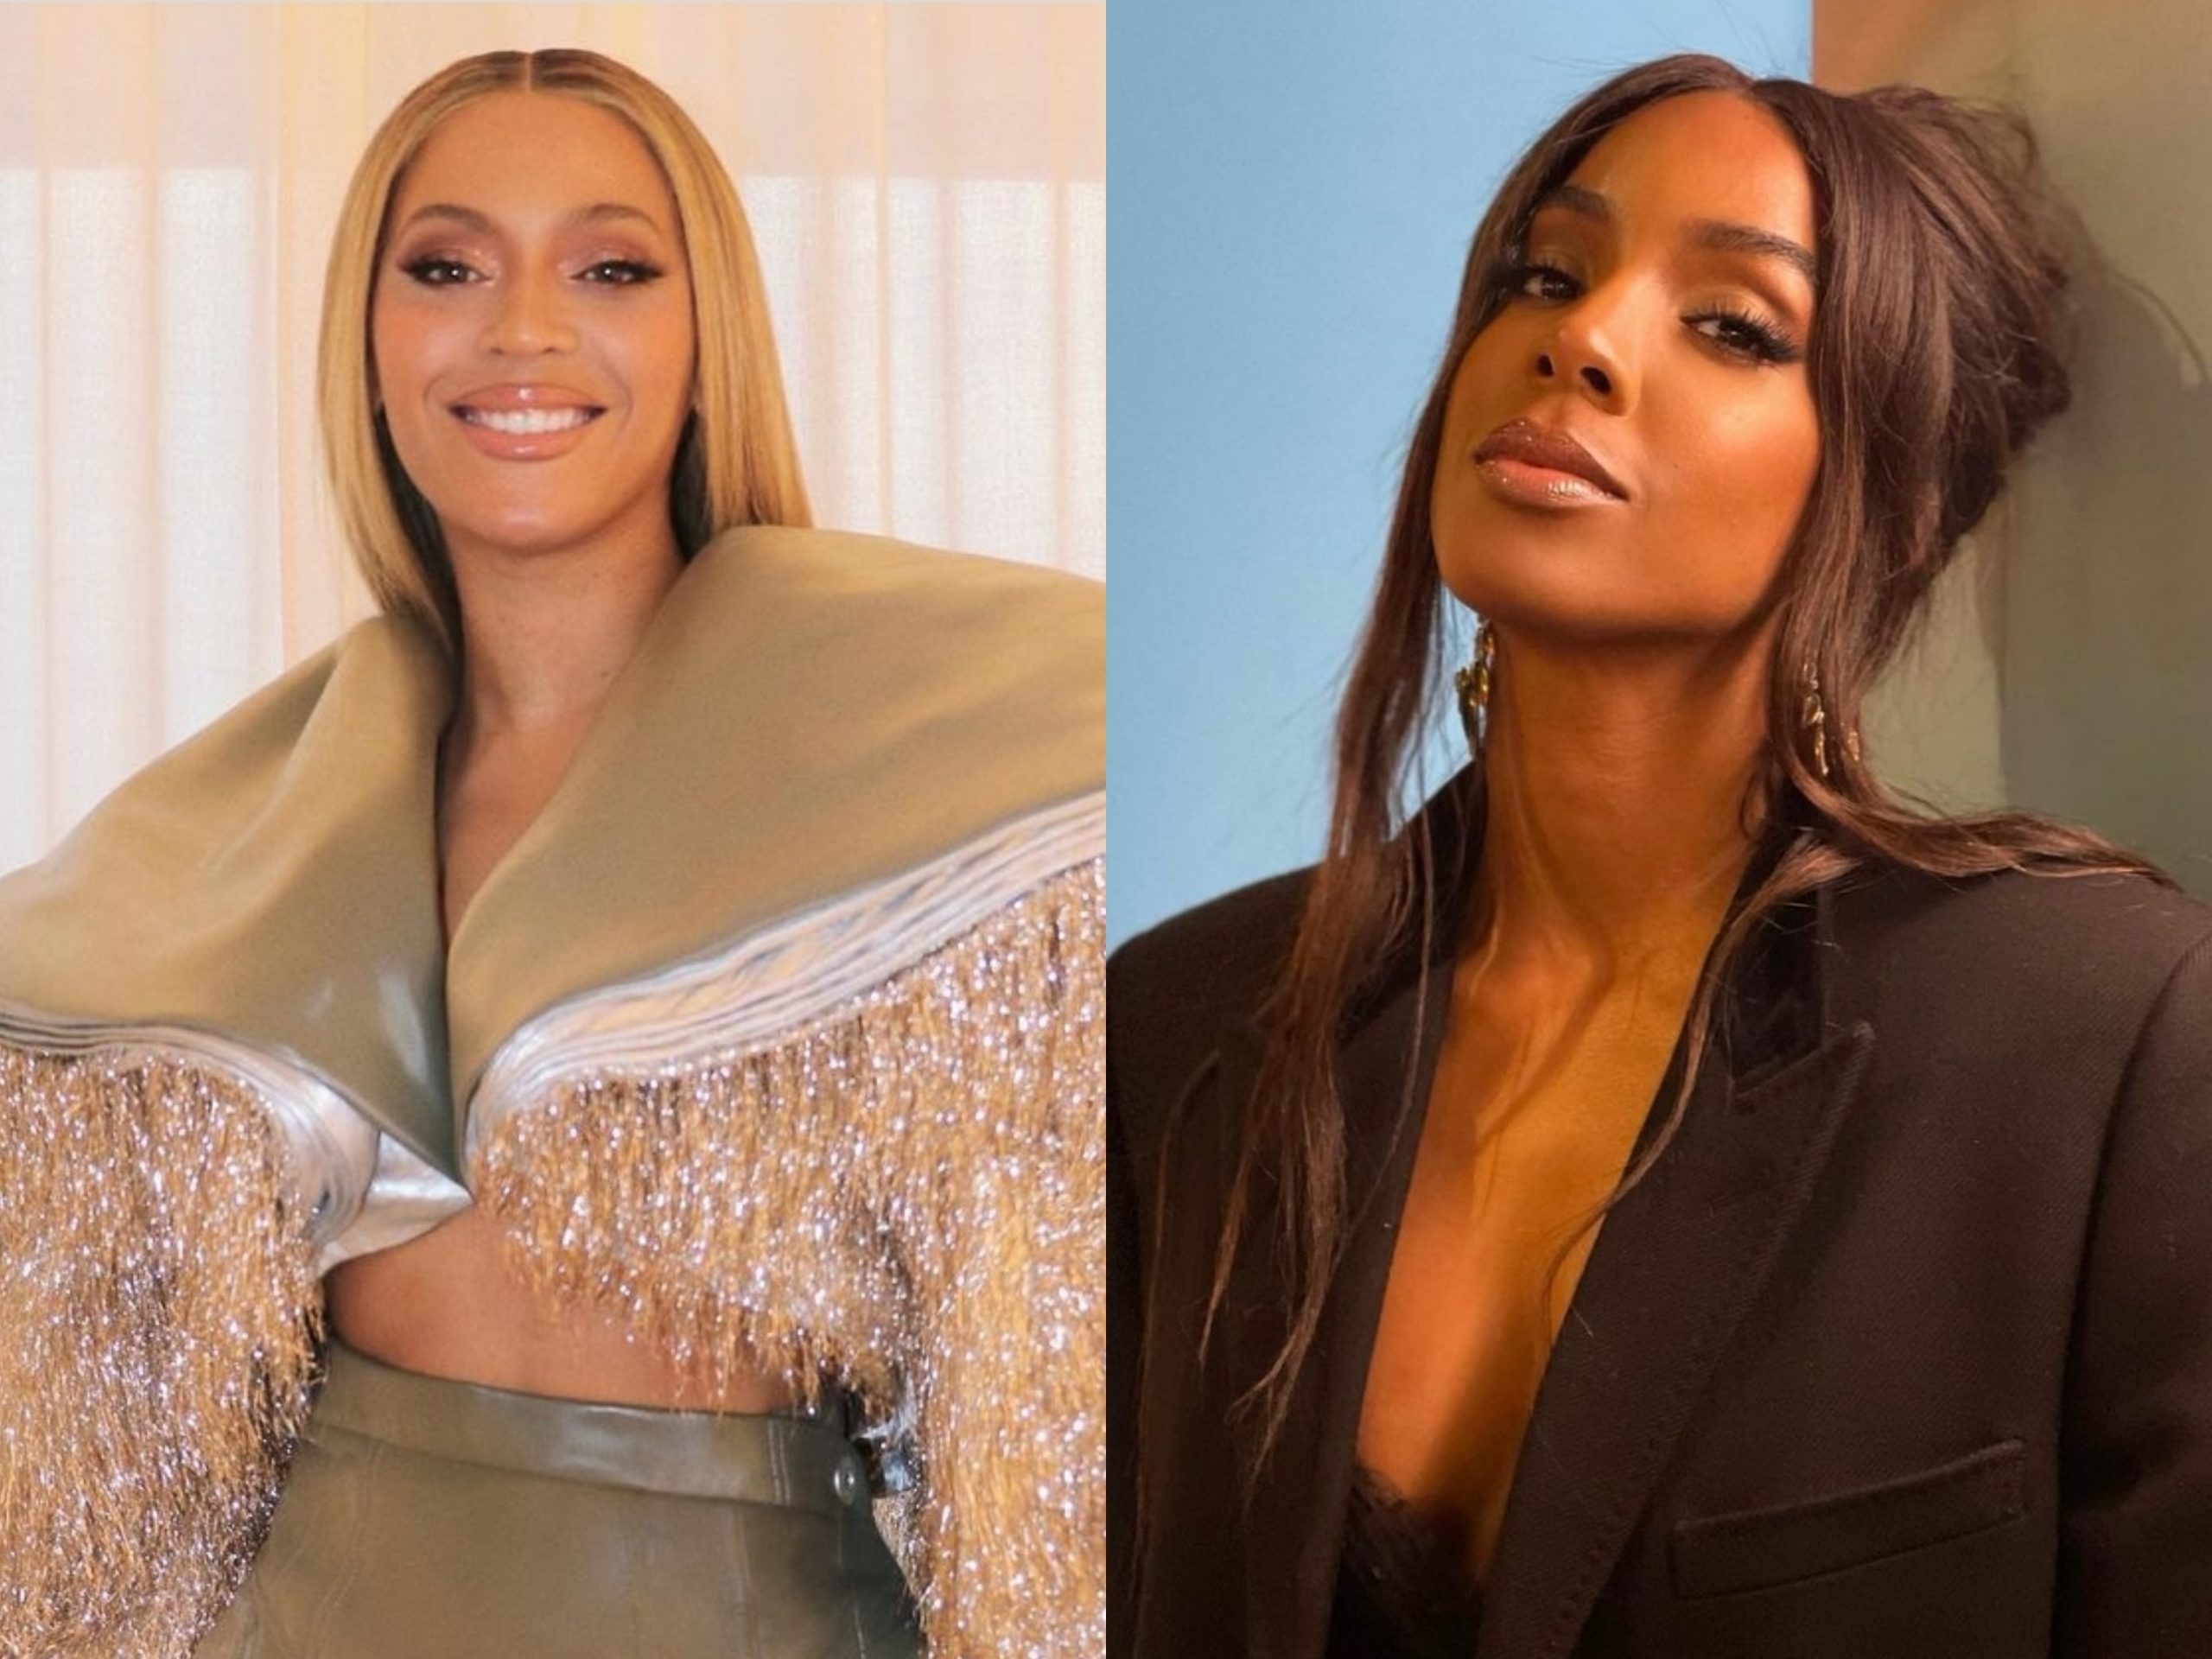 Beyoncé and Kelly Rowland Partner with Harris County to Build Housing for Homeless